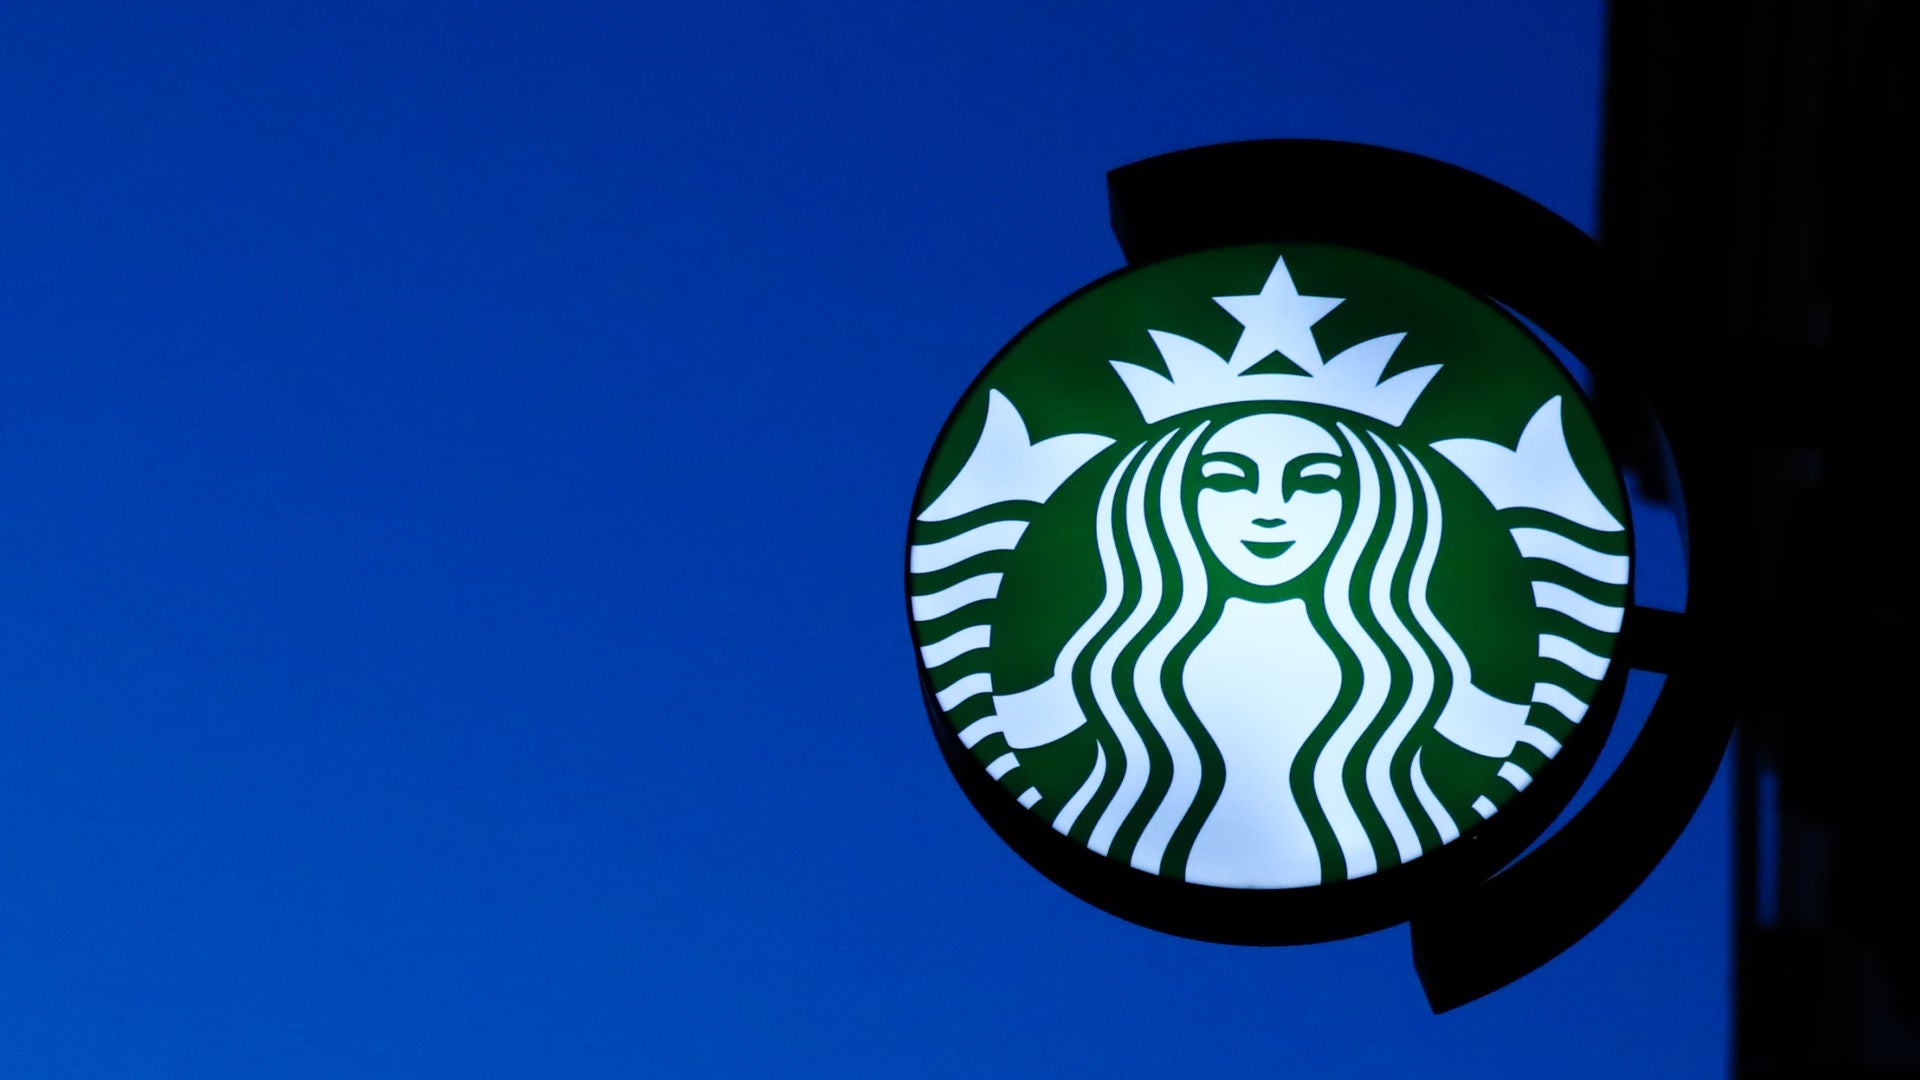 Starbucks Manager Fired After Arrests Of 2 Black Men Sues For Racial Bias